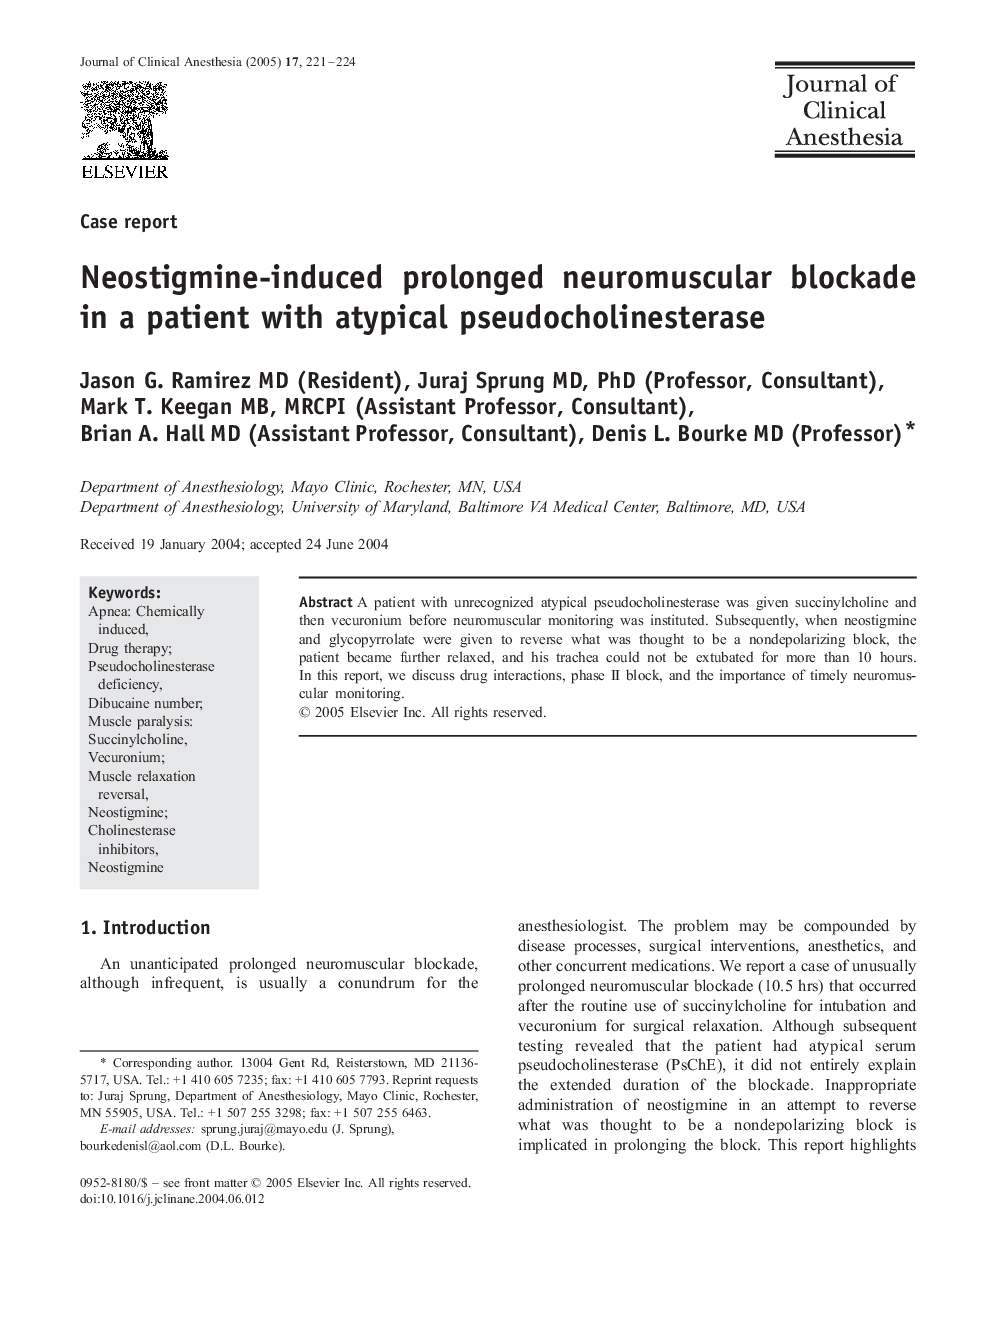 Neostigmine-induced prolonged neuromuscular blockade in a patient with atypical pseudocholinesterase